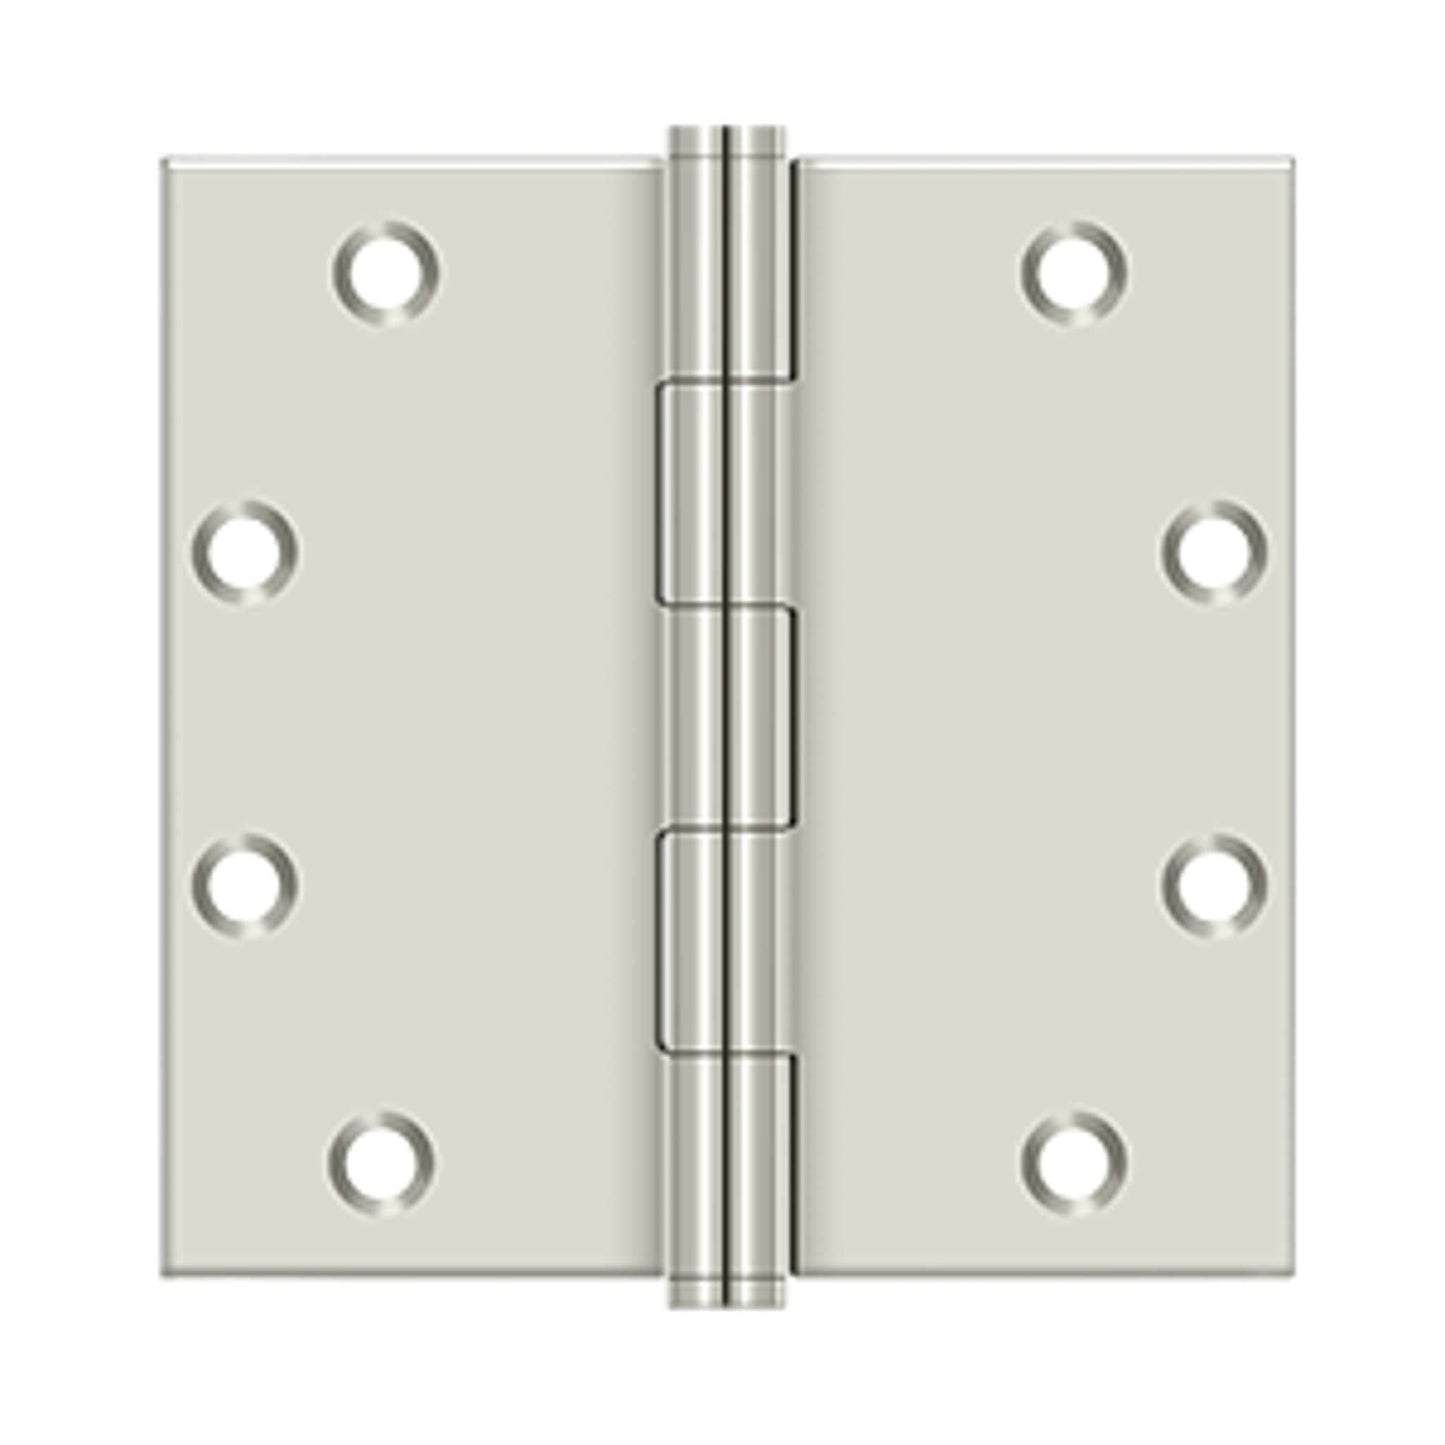 Deltana - 5" x 5" Square Hinges, Solid Brass Hinges